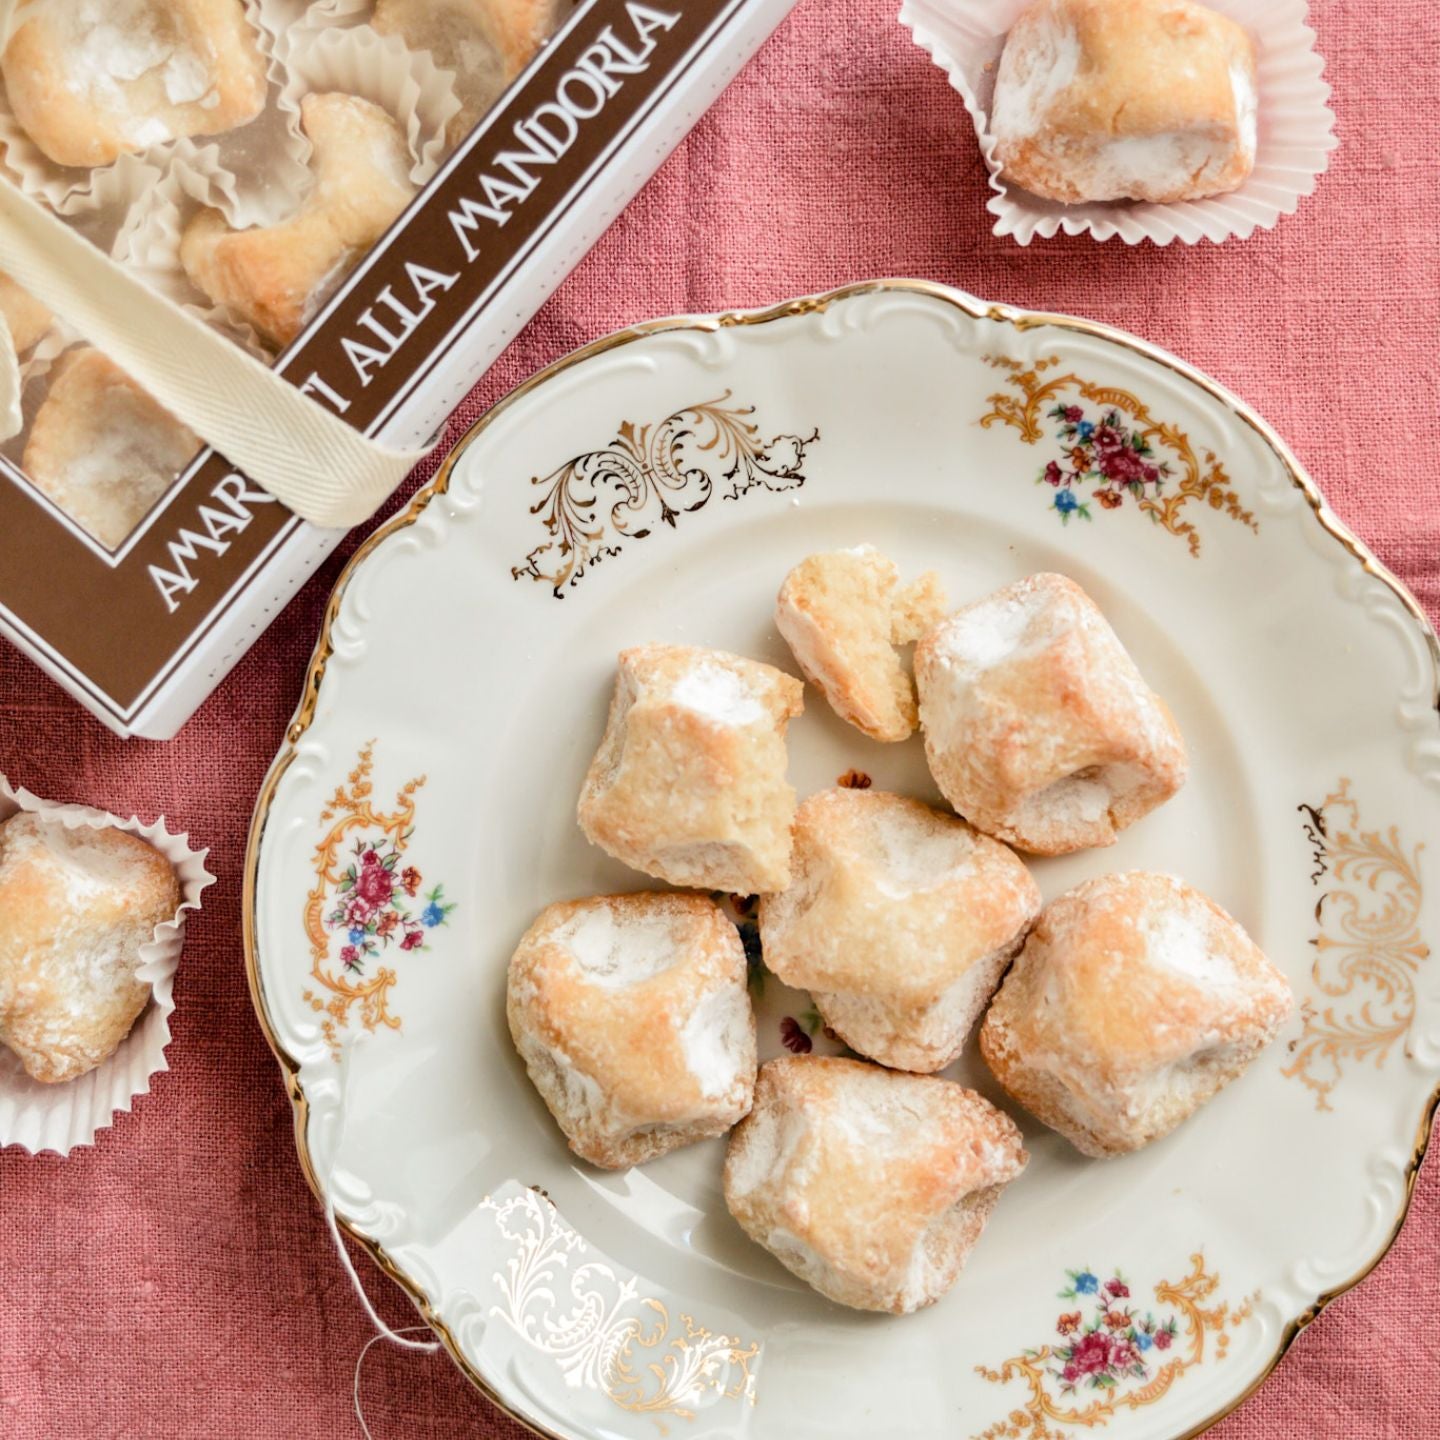 Italian artisan biscuits, cantucci and amaretti | UK Importer of Italian food products